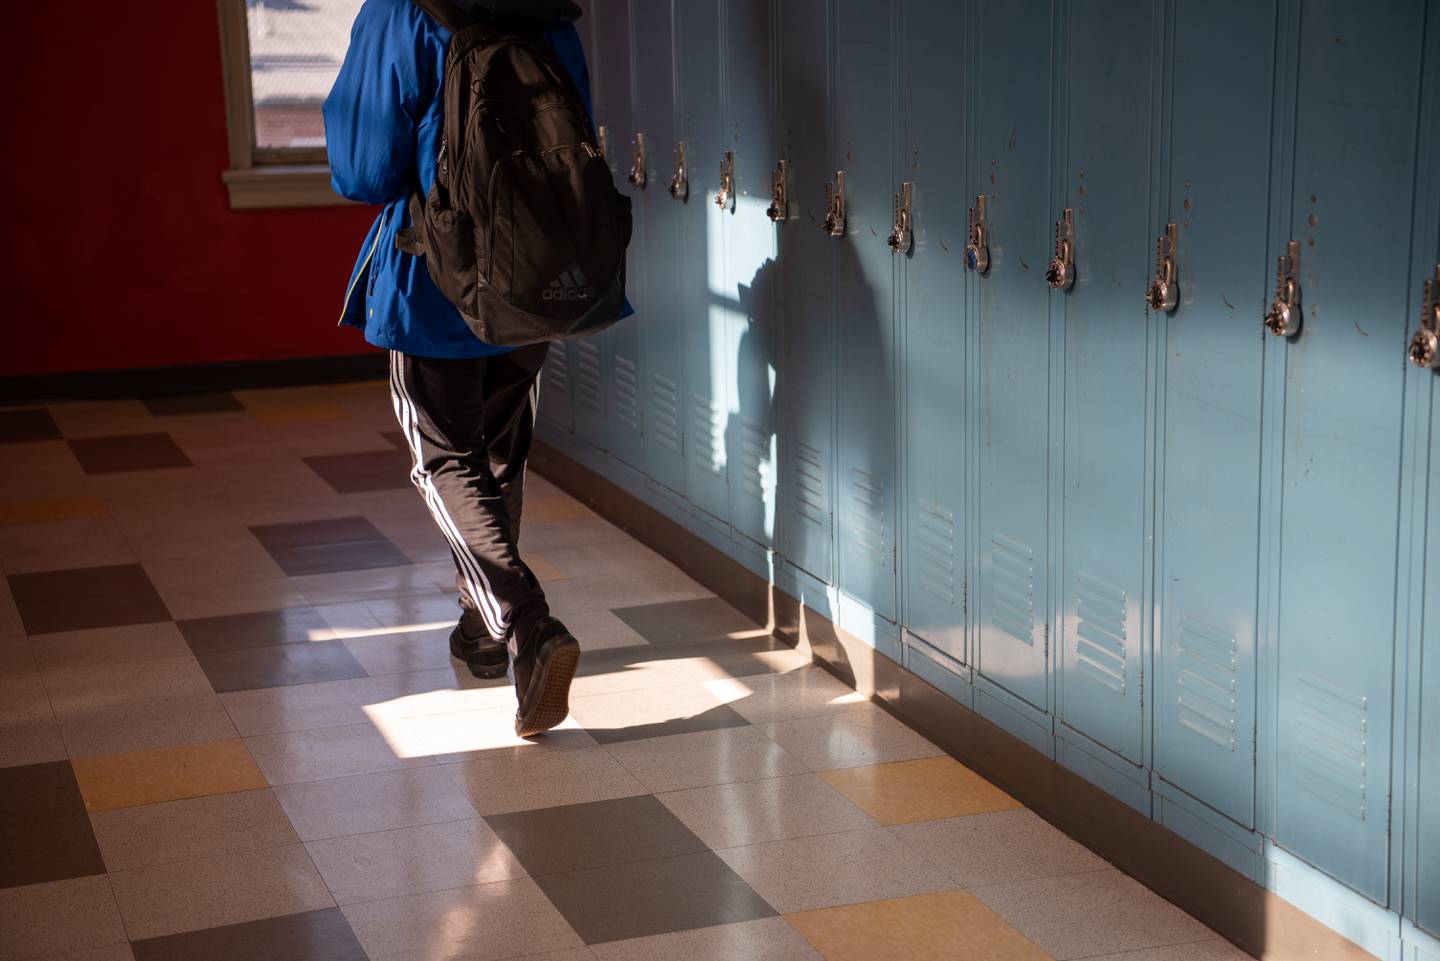 A student walks past lockers in the hallway outside Damien Ford’s Baltimore School for The Arts classroom on Dec. 21, 2022. Ford teaches an African American Literature class where shows his students comparisons between Lauryn Hill lyrics and the work of Zora Neal Hurston.